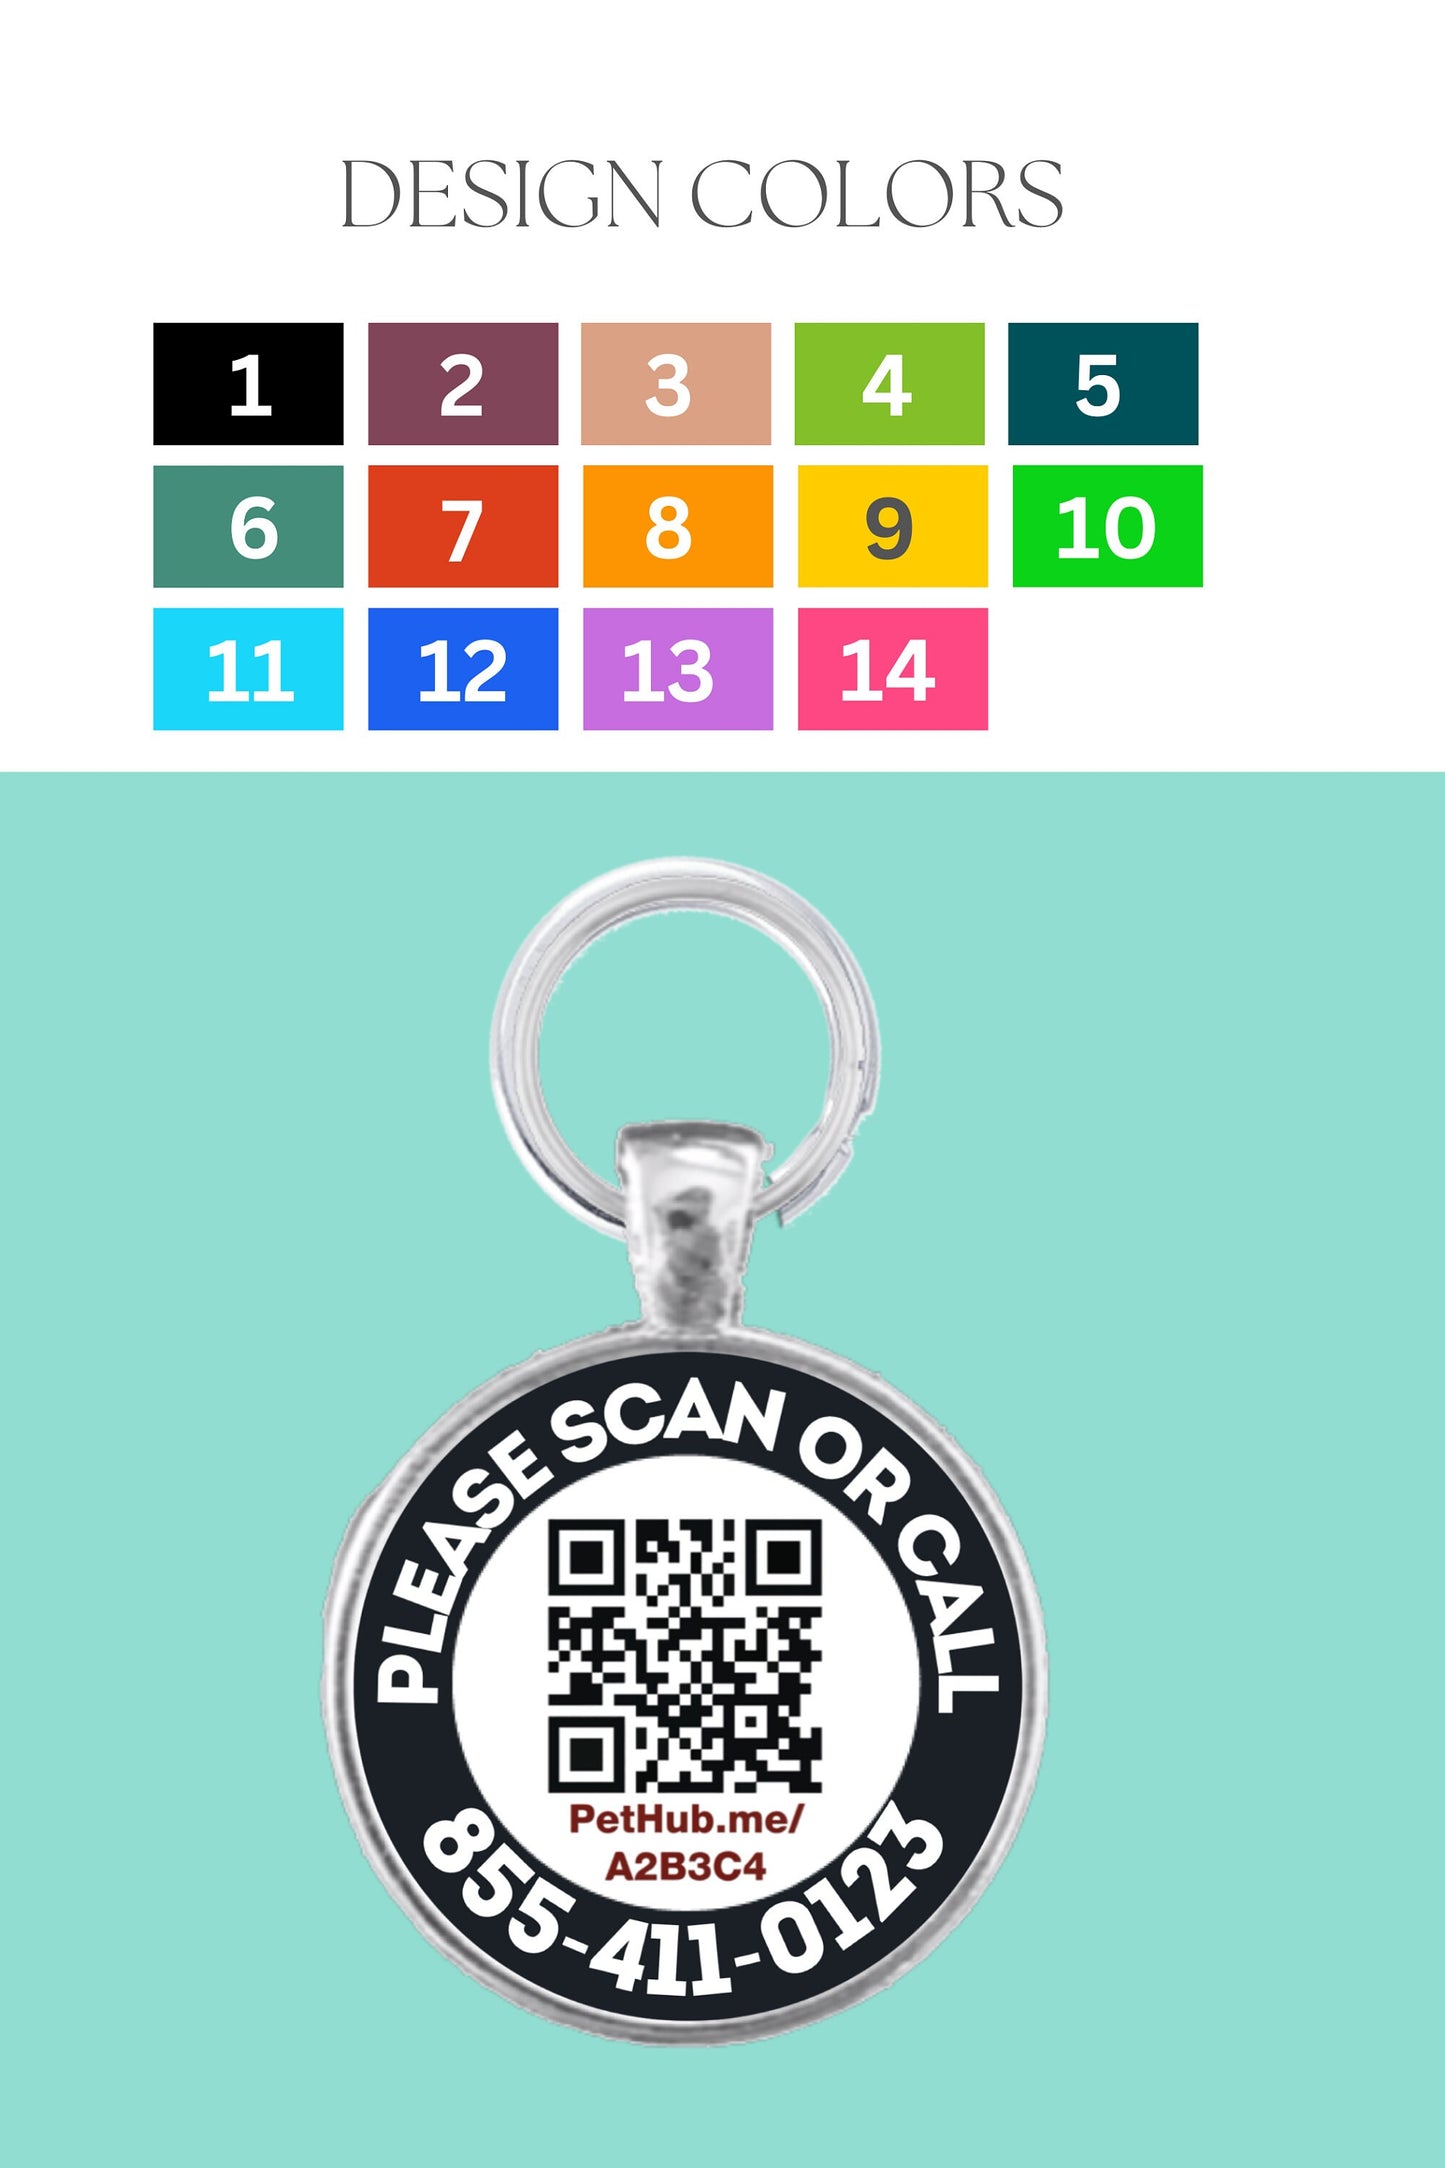 QR Code Dog Tag Cat ID Free PetHub Profile and Lost Pet Hotline- non personalized